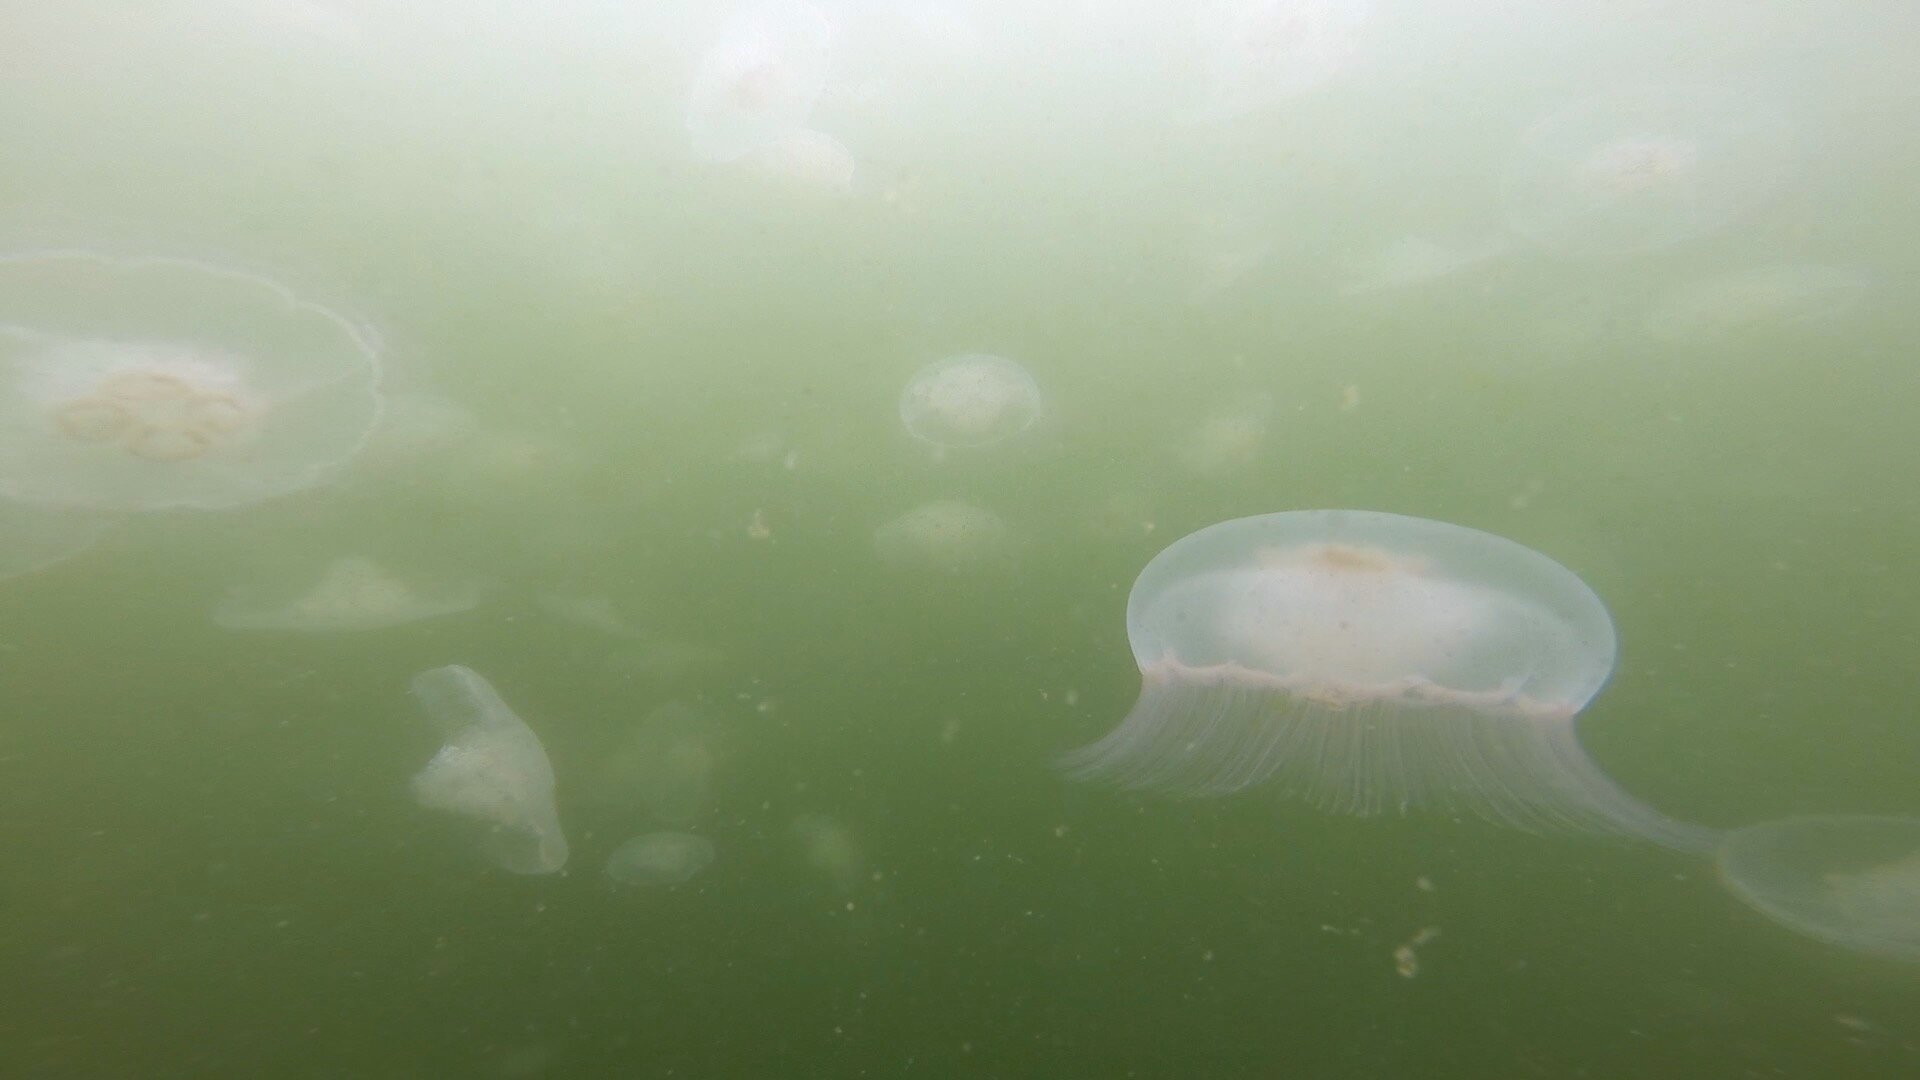 #Moon jellies appear to be gobbling up zooplankton in Puget Sound